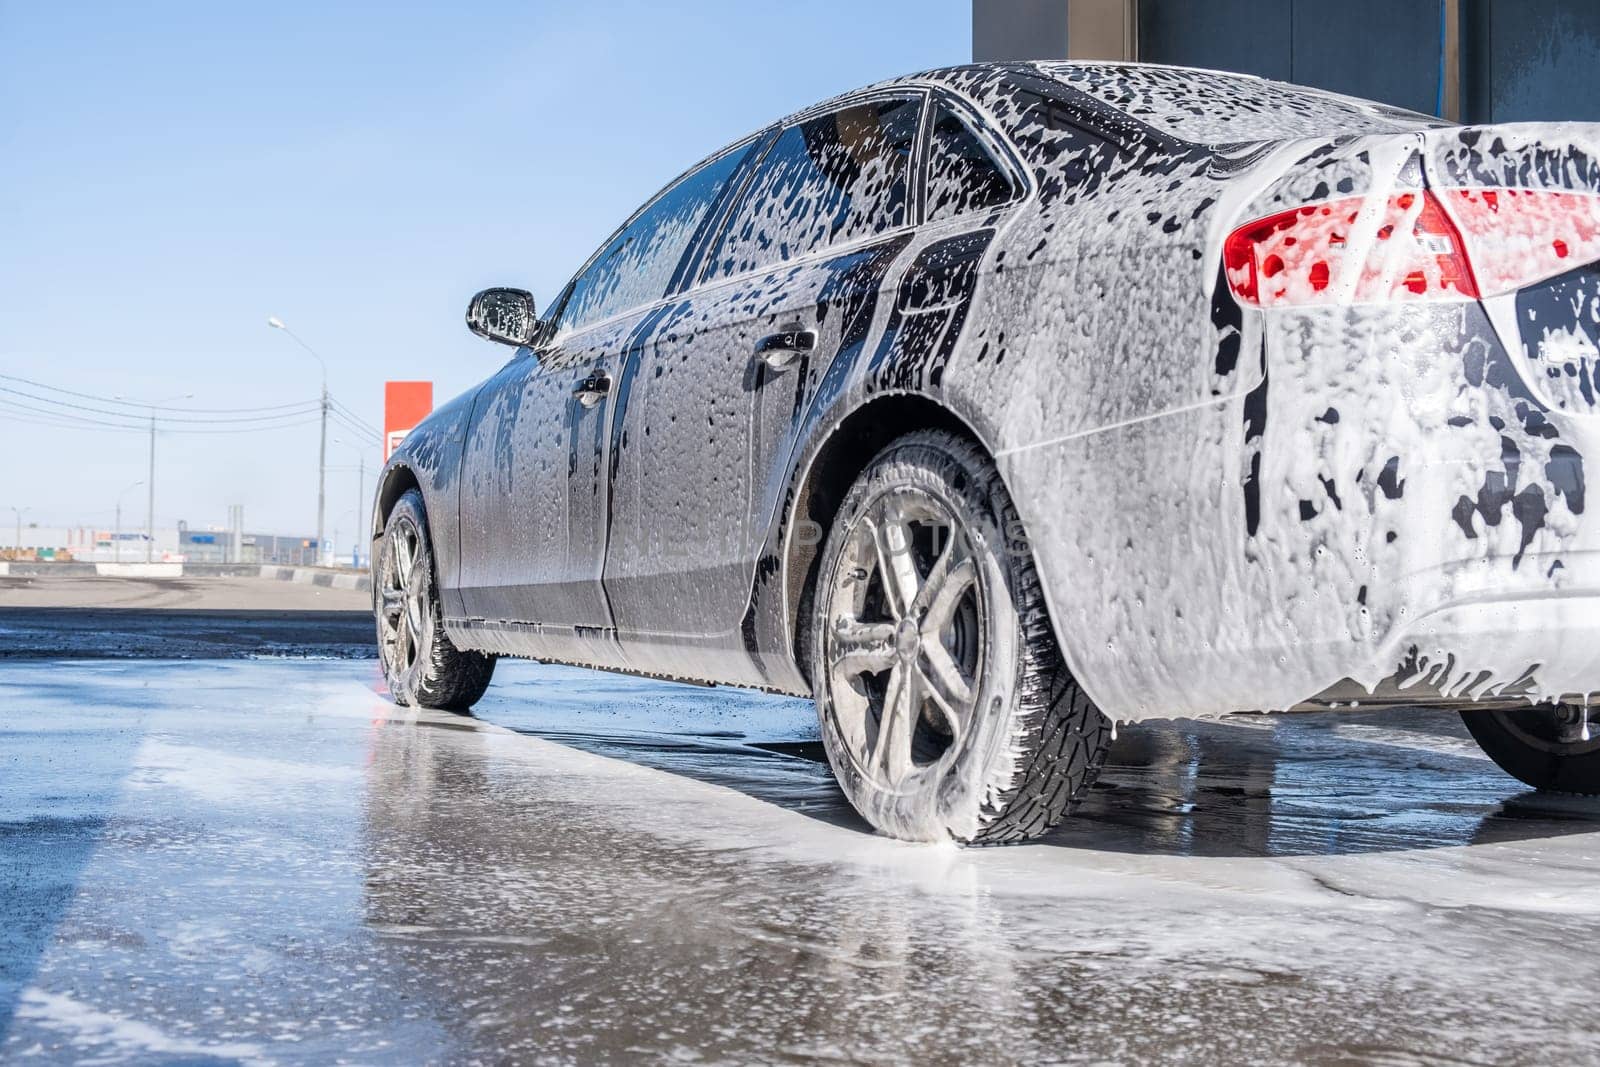 Foamy car at car wash, with tire, wheel, and hood covered in suds by AnatoliiFoto